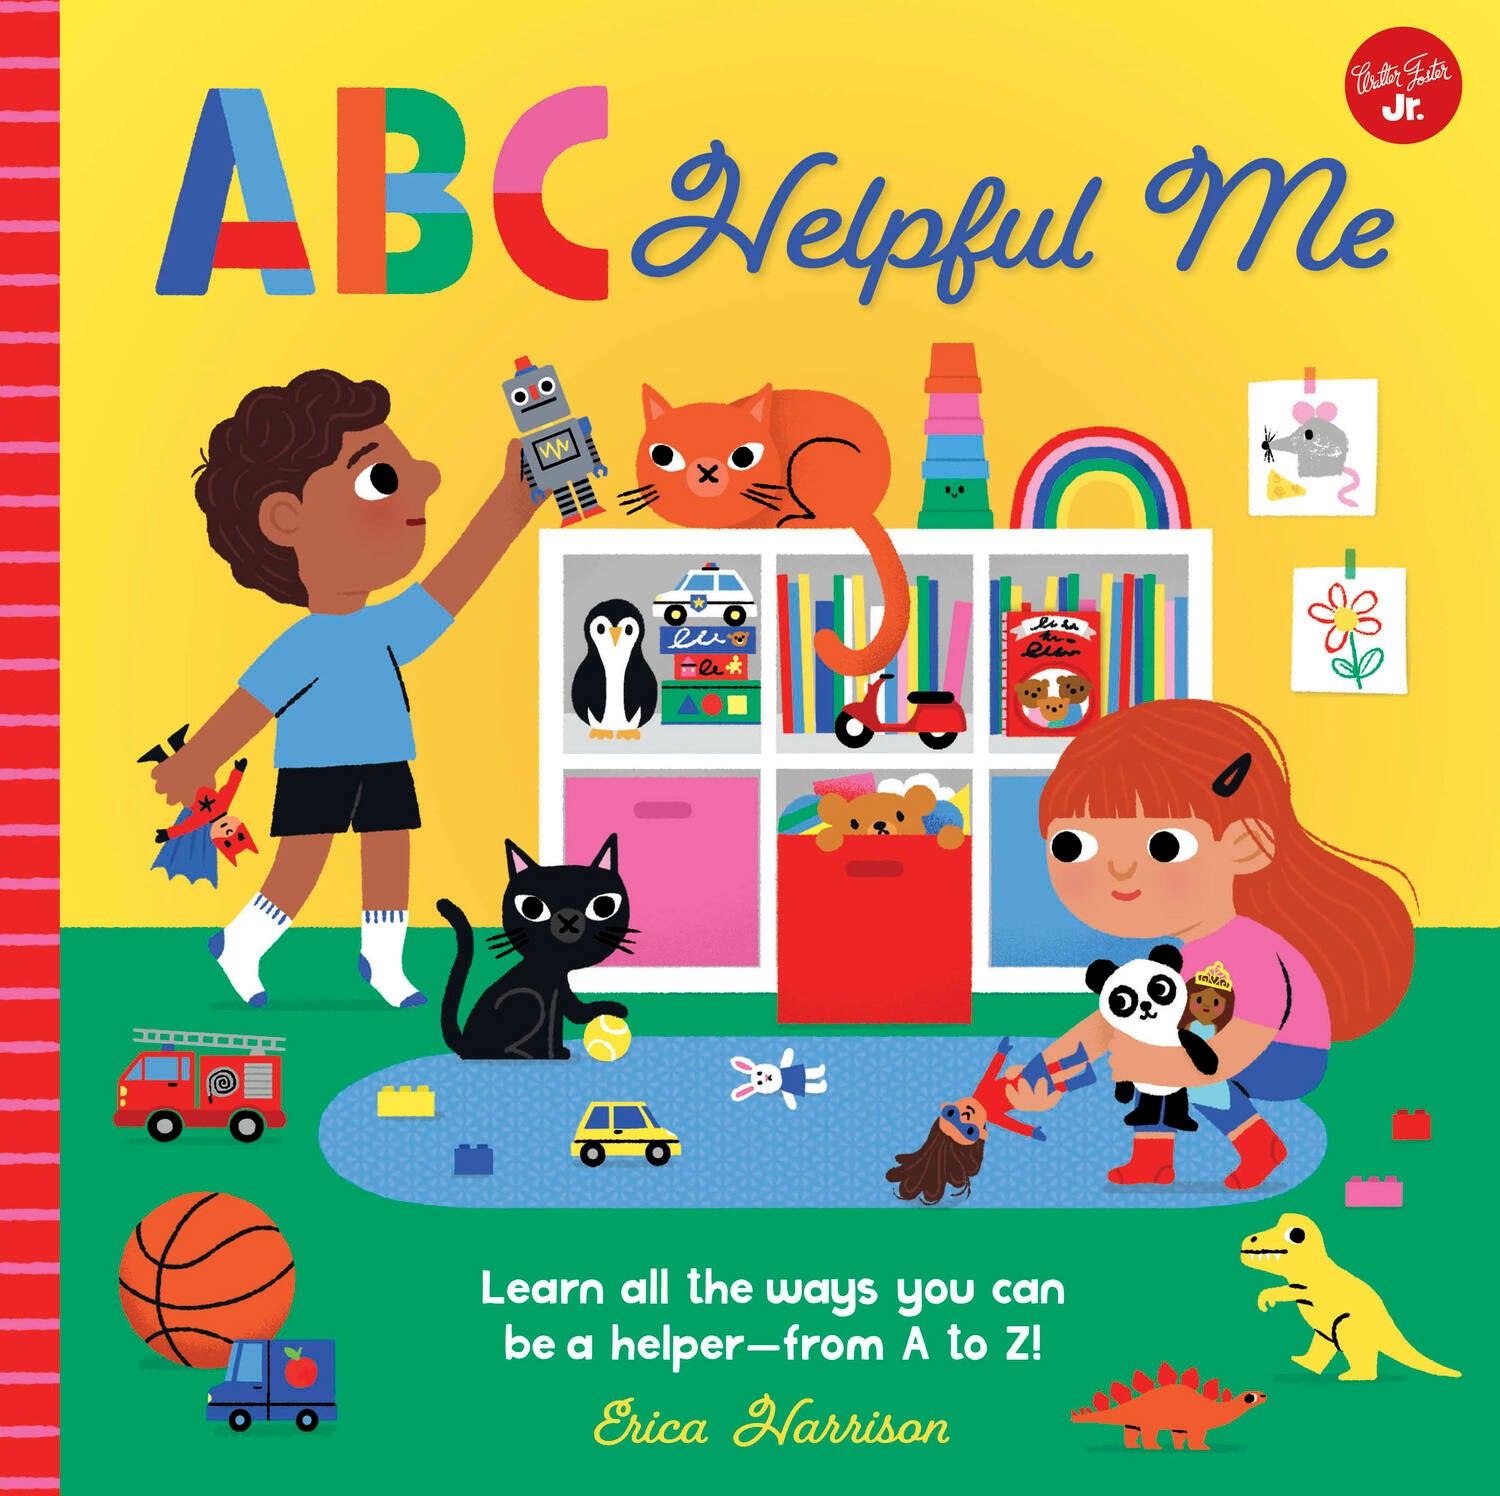 ABC for Me: ABC Helpful Me: Learn all the ways you can be a helper--from A to Z!